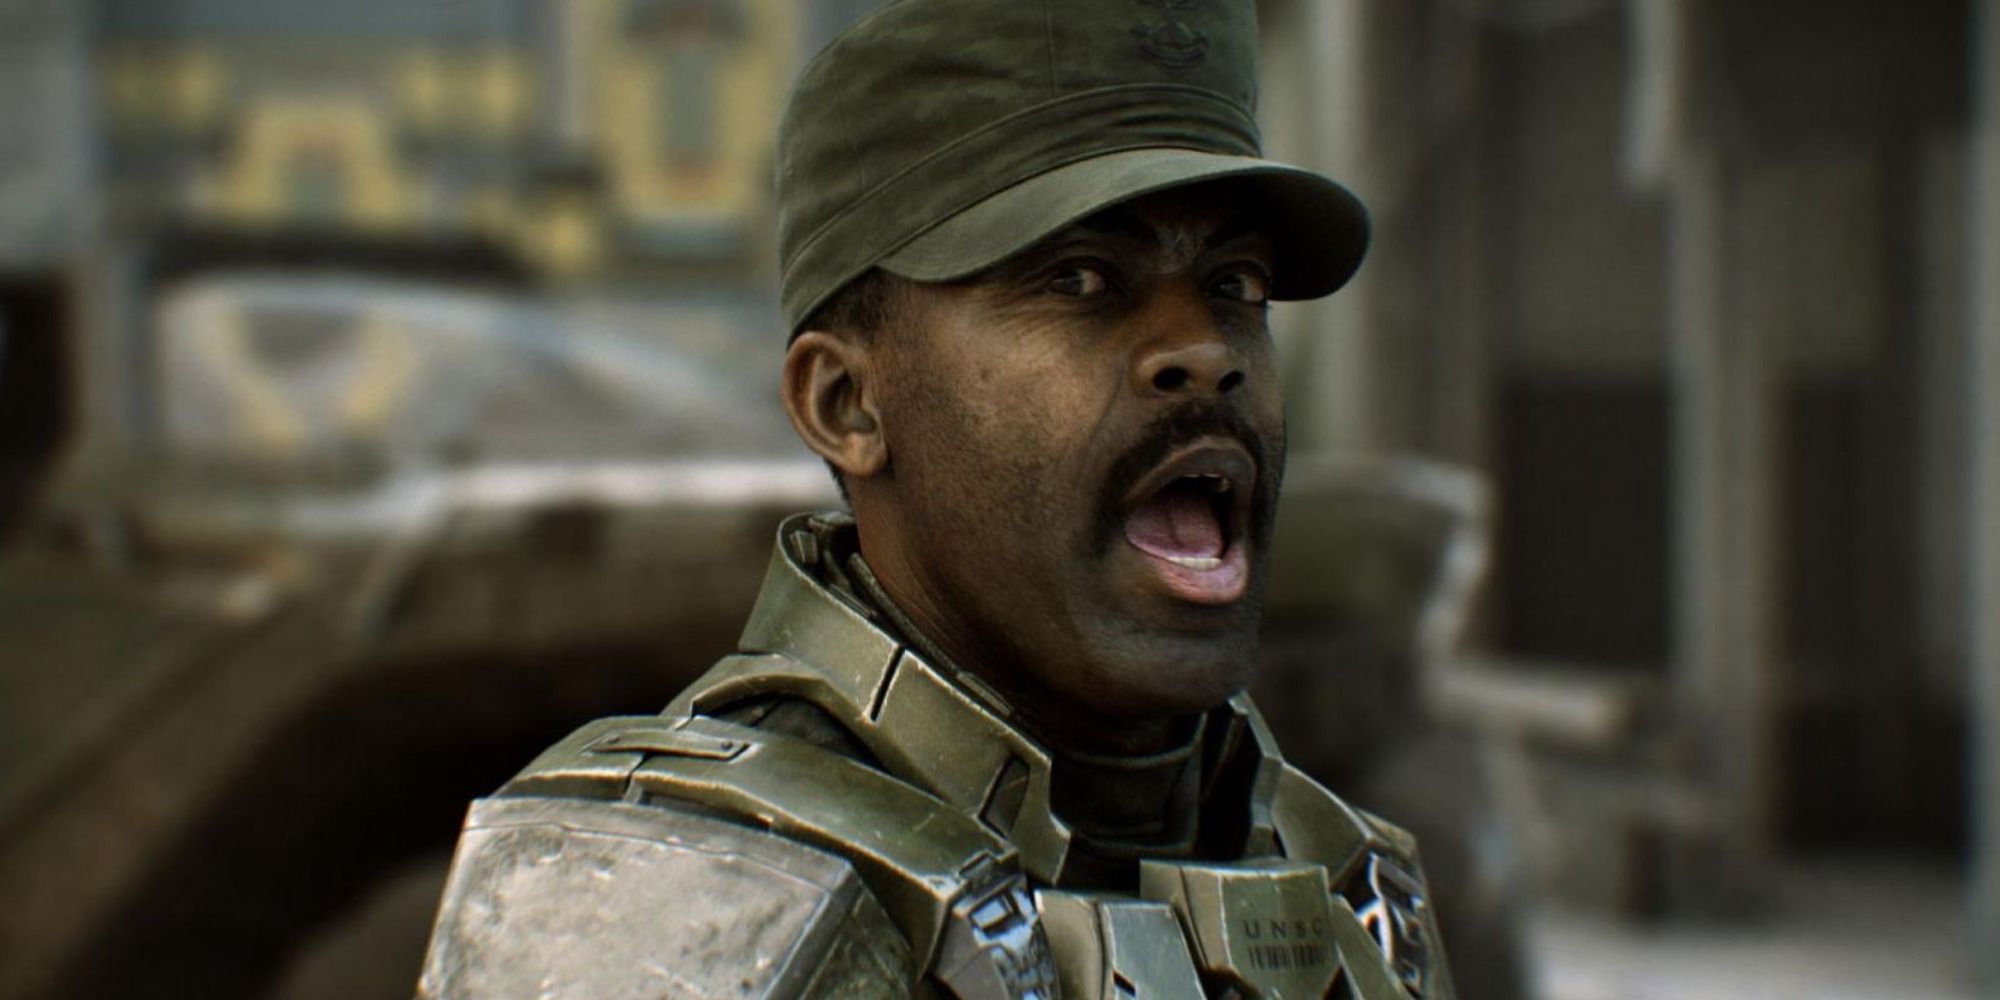 Sergeant Major Avery Junior Johnson yelling at a group of Marines in Halo 2